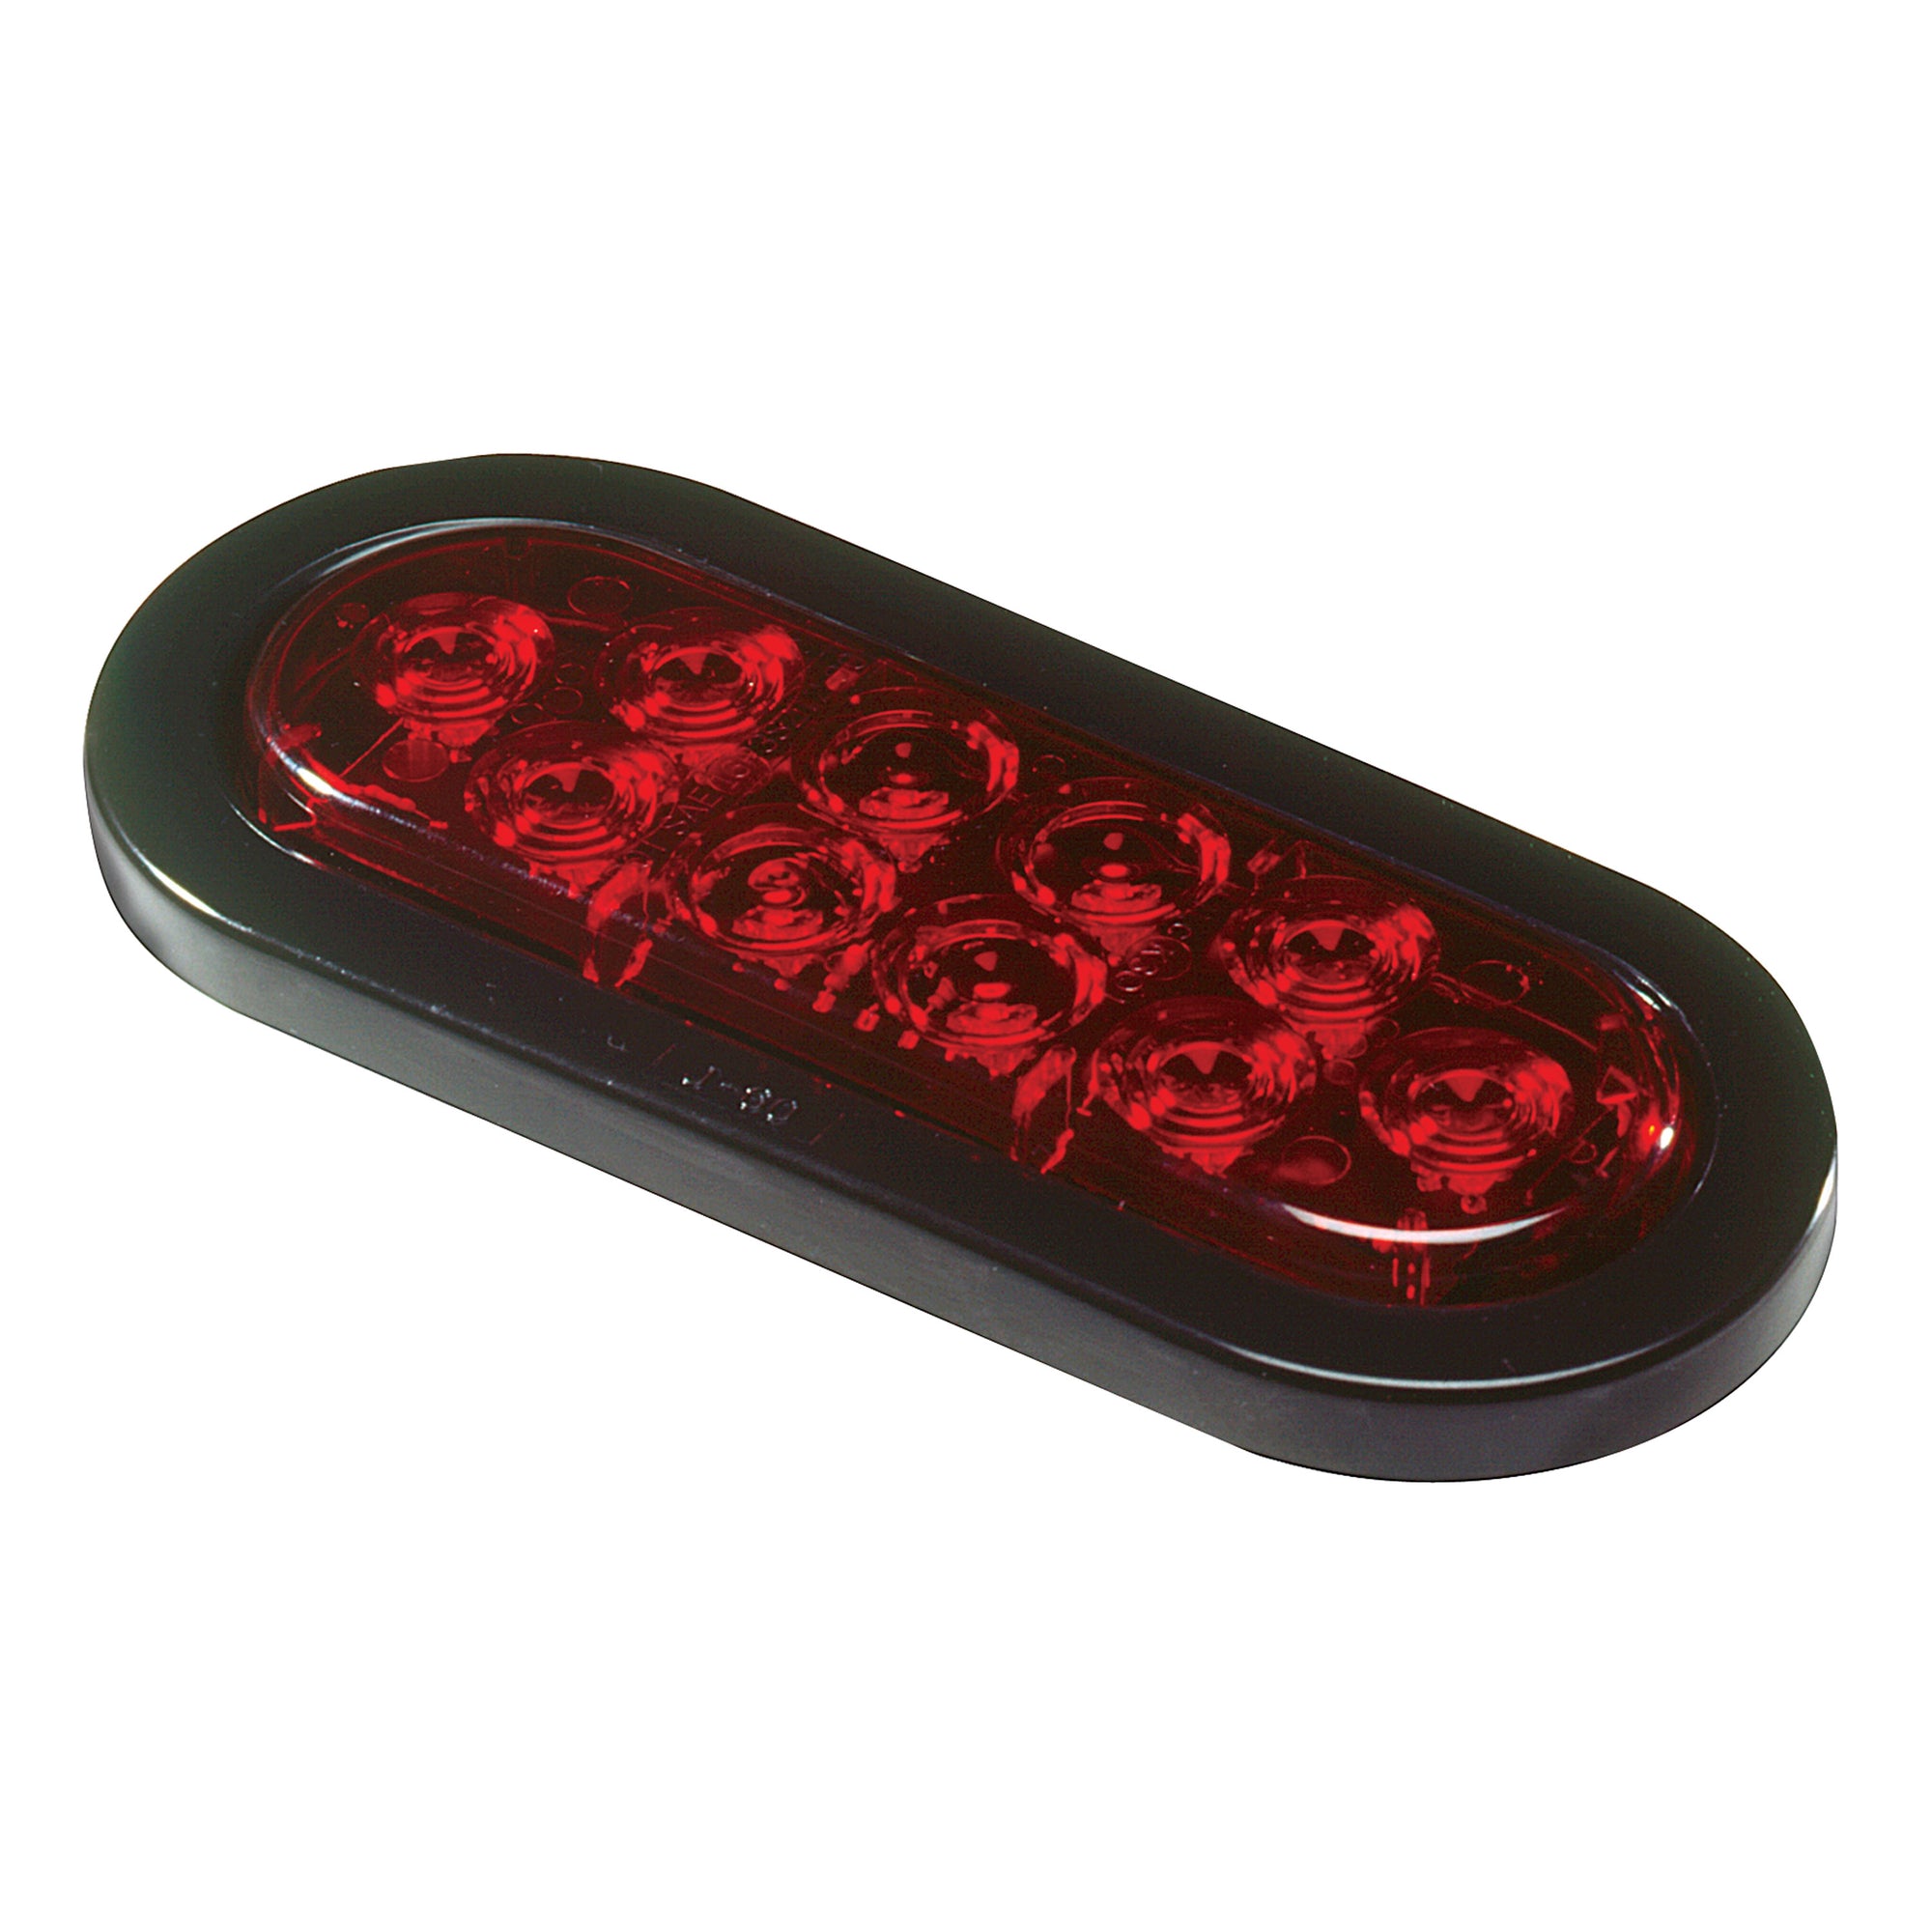 Innovative Lighting 260-4403-7 Oval 6" LED Stop/Turn/Tail Light with Grommet Mount - Red/Red Lens with TK Plug